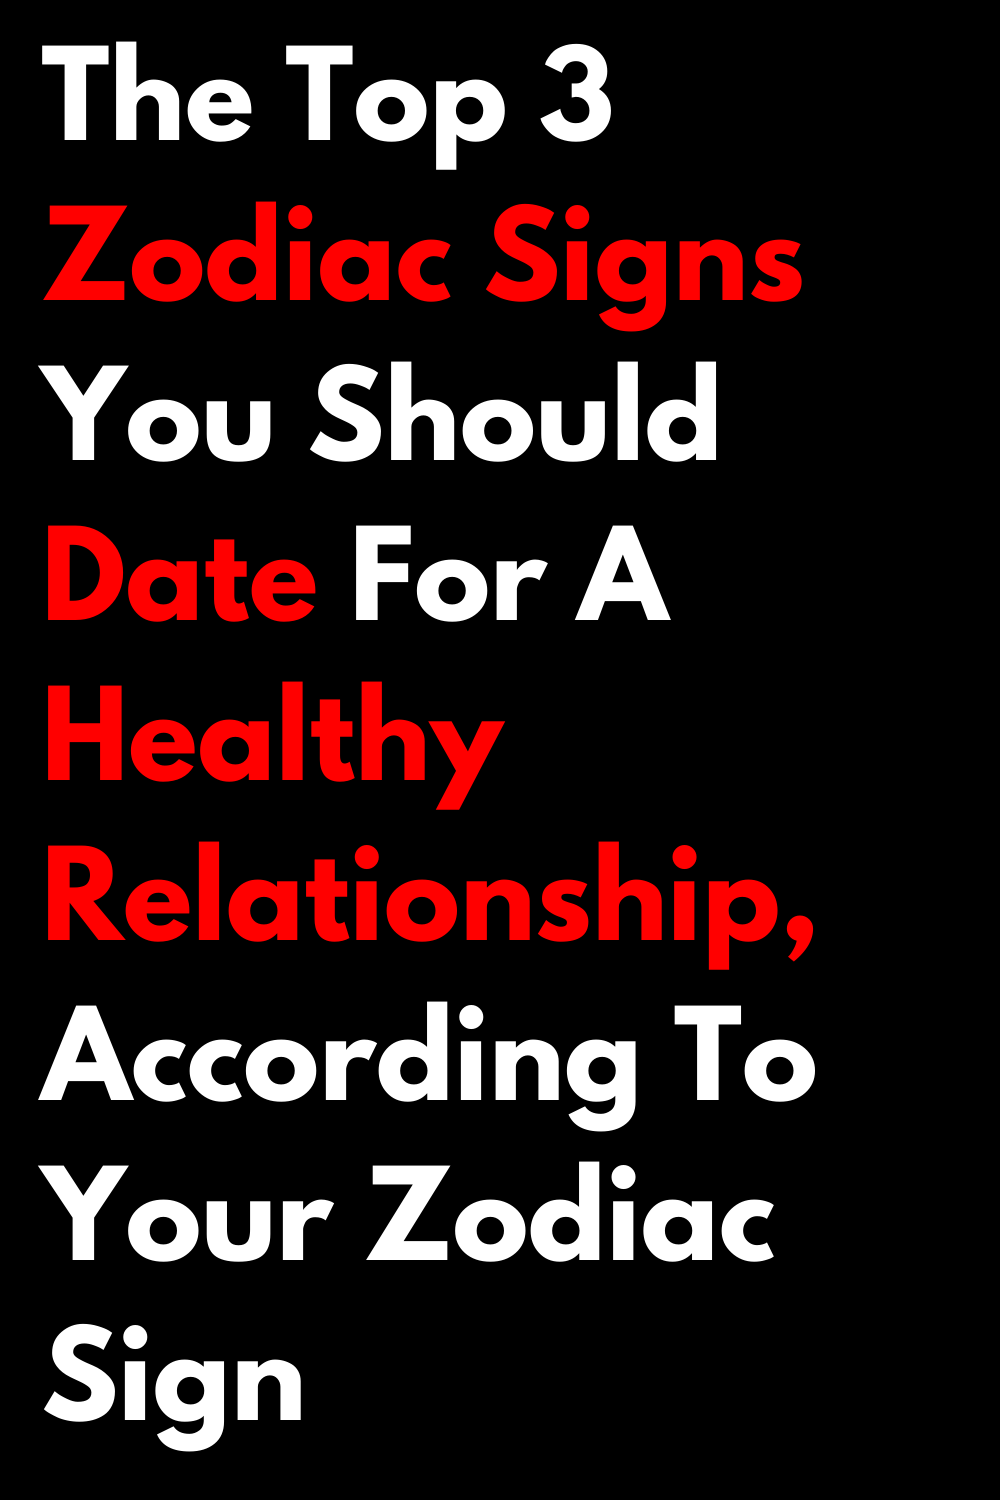 The Top 3 Zodiac Signs You Should Date For A Healthy Relationship, According To Your Zodiac Sign